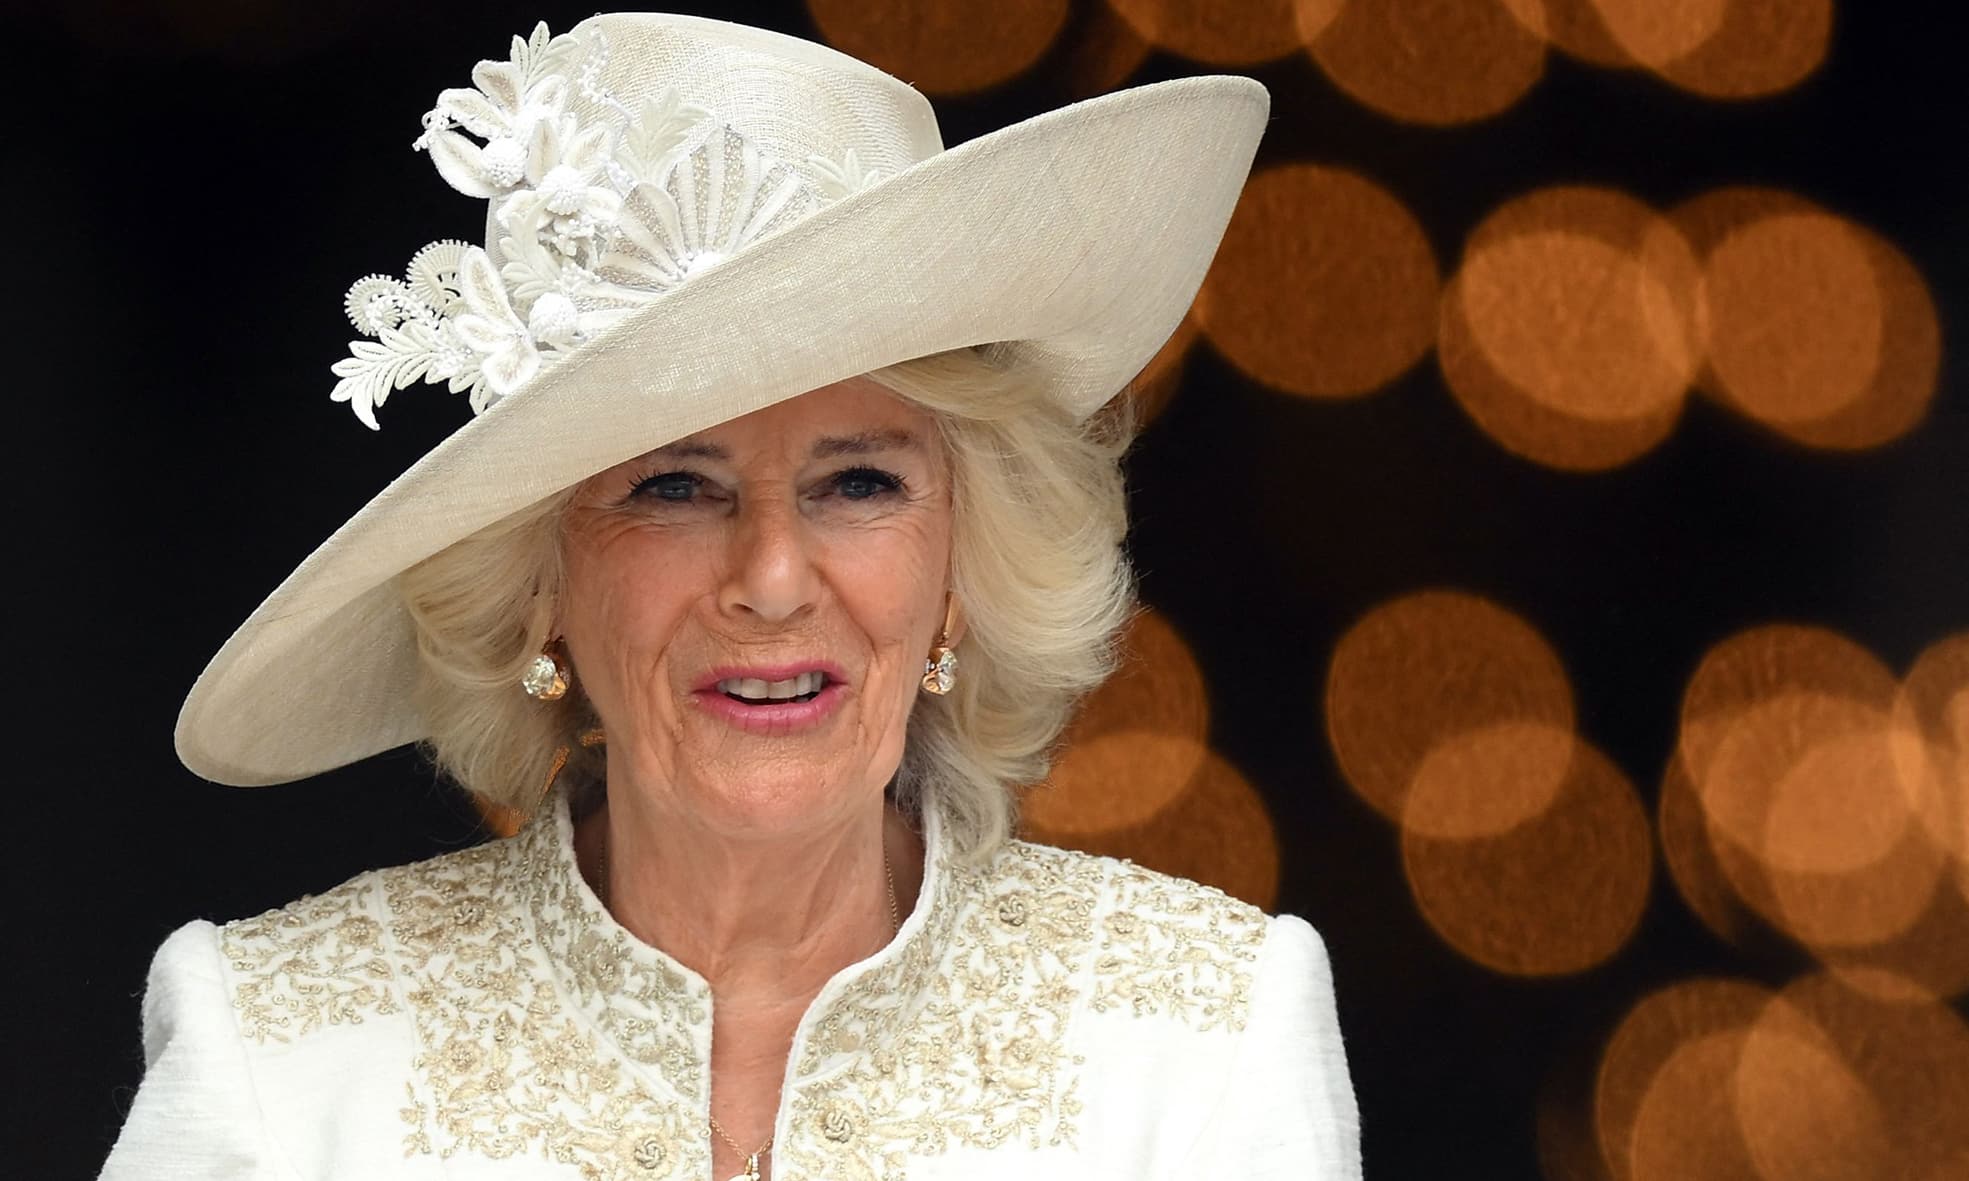 In this file photo Britain's Camilla, Duchess of Cornwall, leaves at the end of the National Service of Thanksgiving for The Queen's reign at Saint Paul's Cathedral in London as part of Queen Elizabeth II's platinum jubilee celebrations. –AFP photos